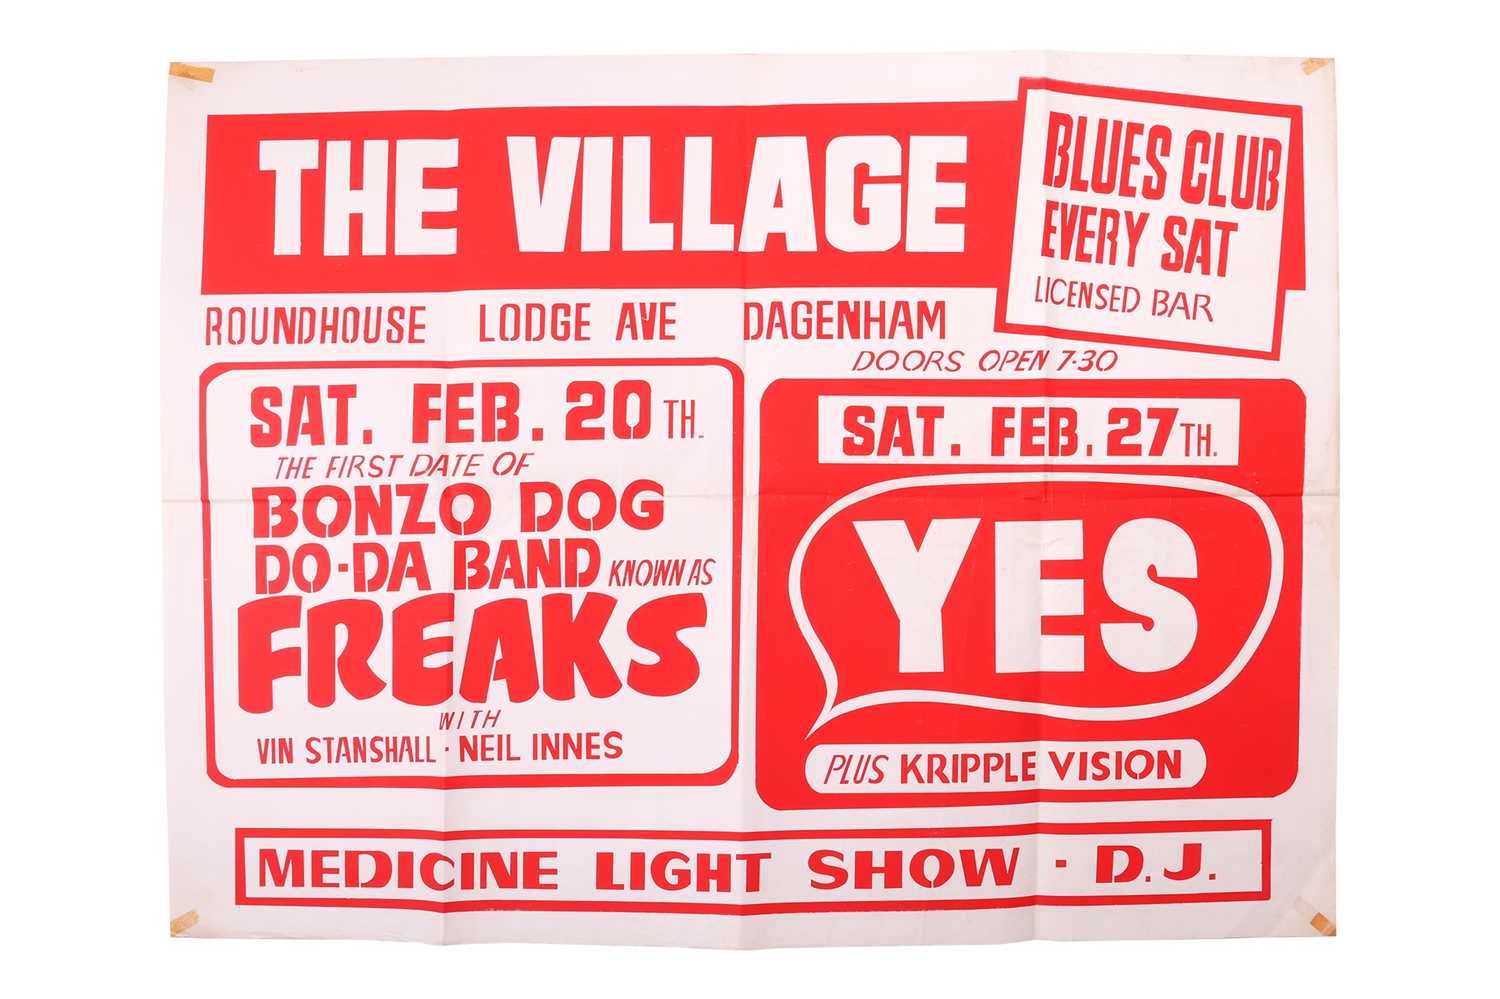 An original 1971 concert promotional poster for 'The First Date of the Bonzo Dog Do-Da Band known as